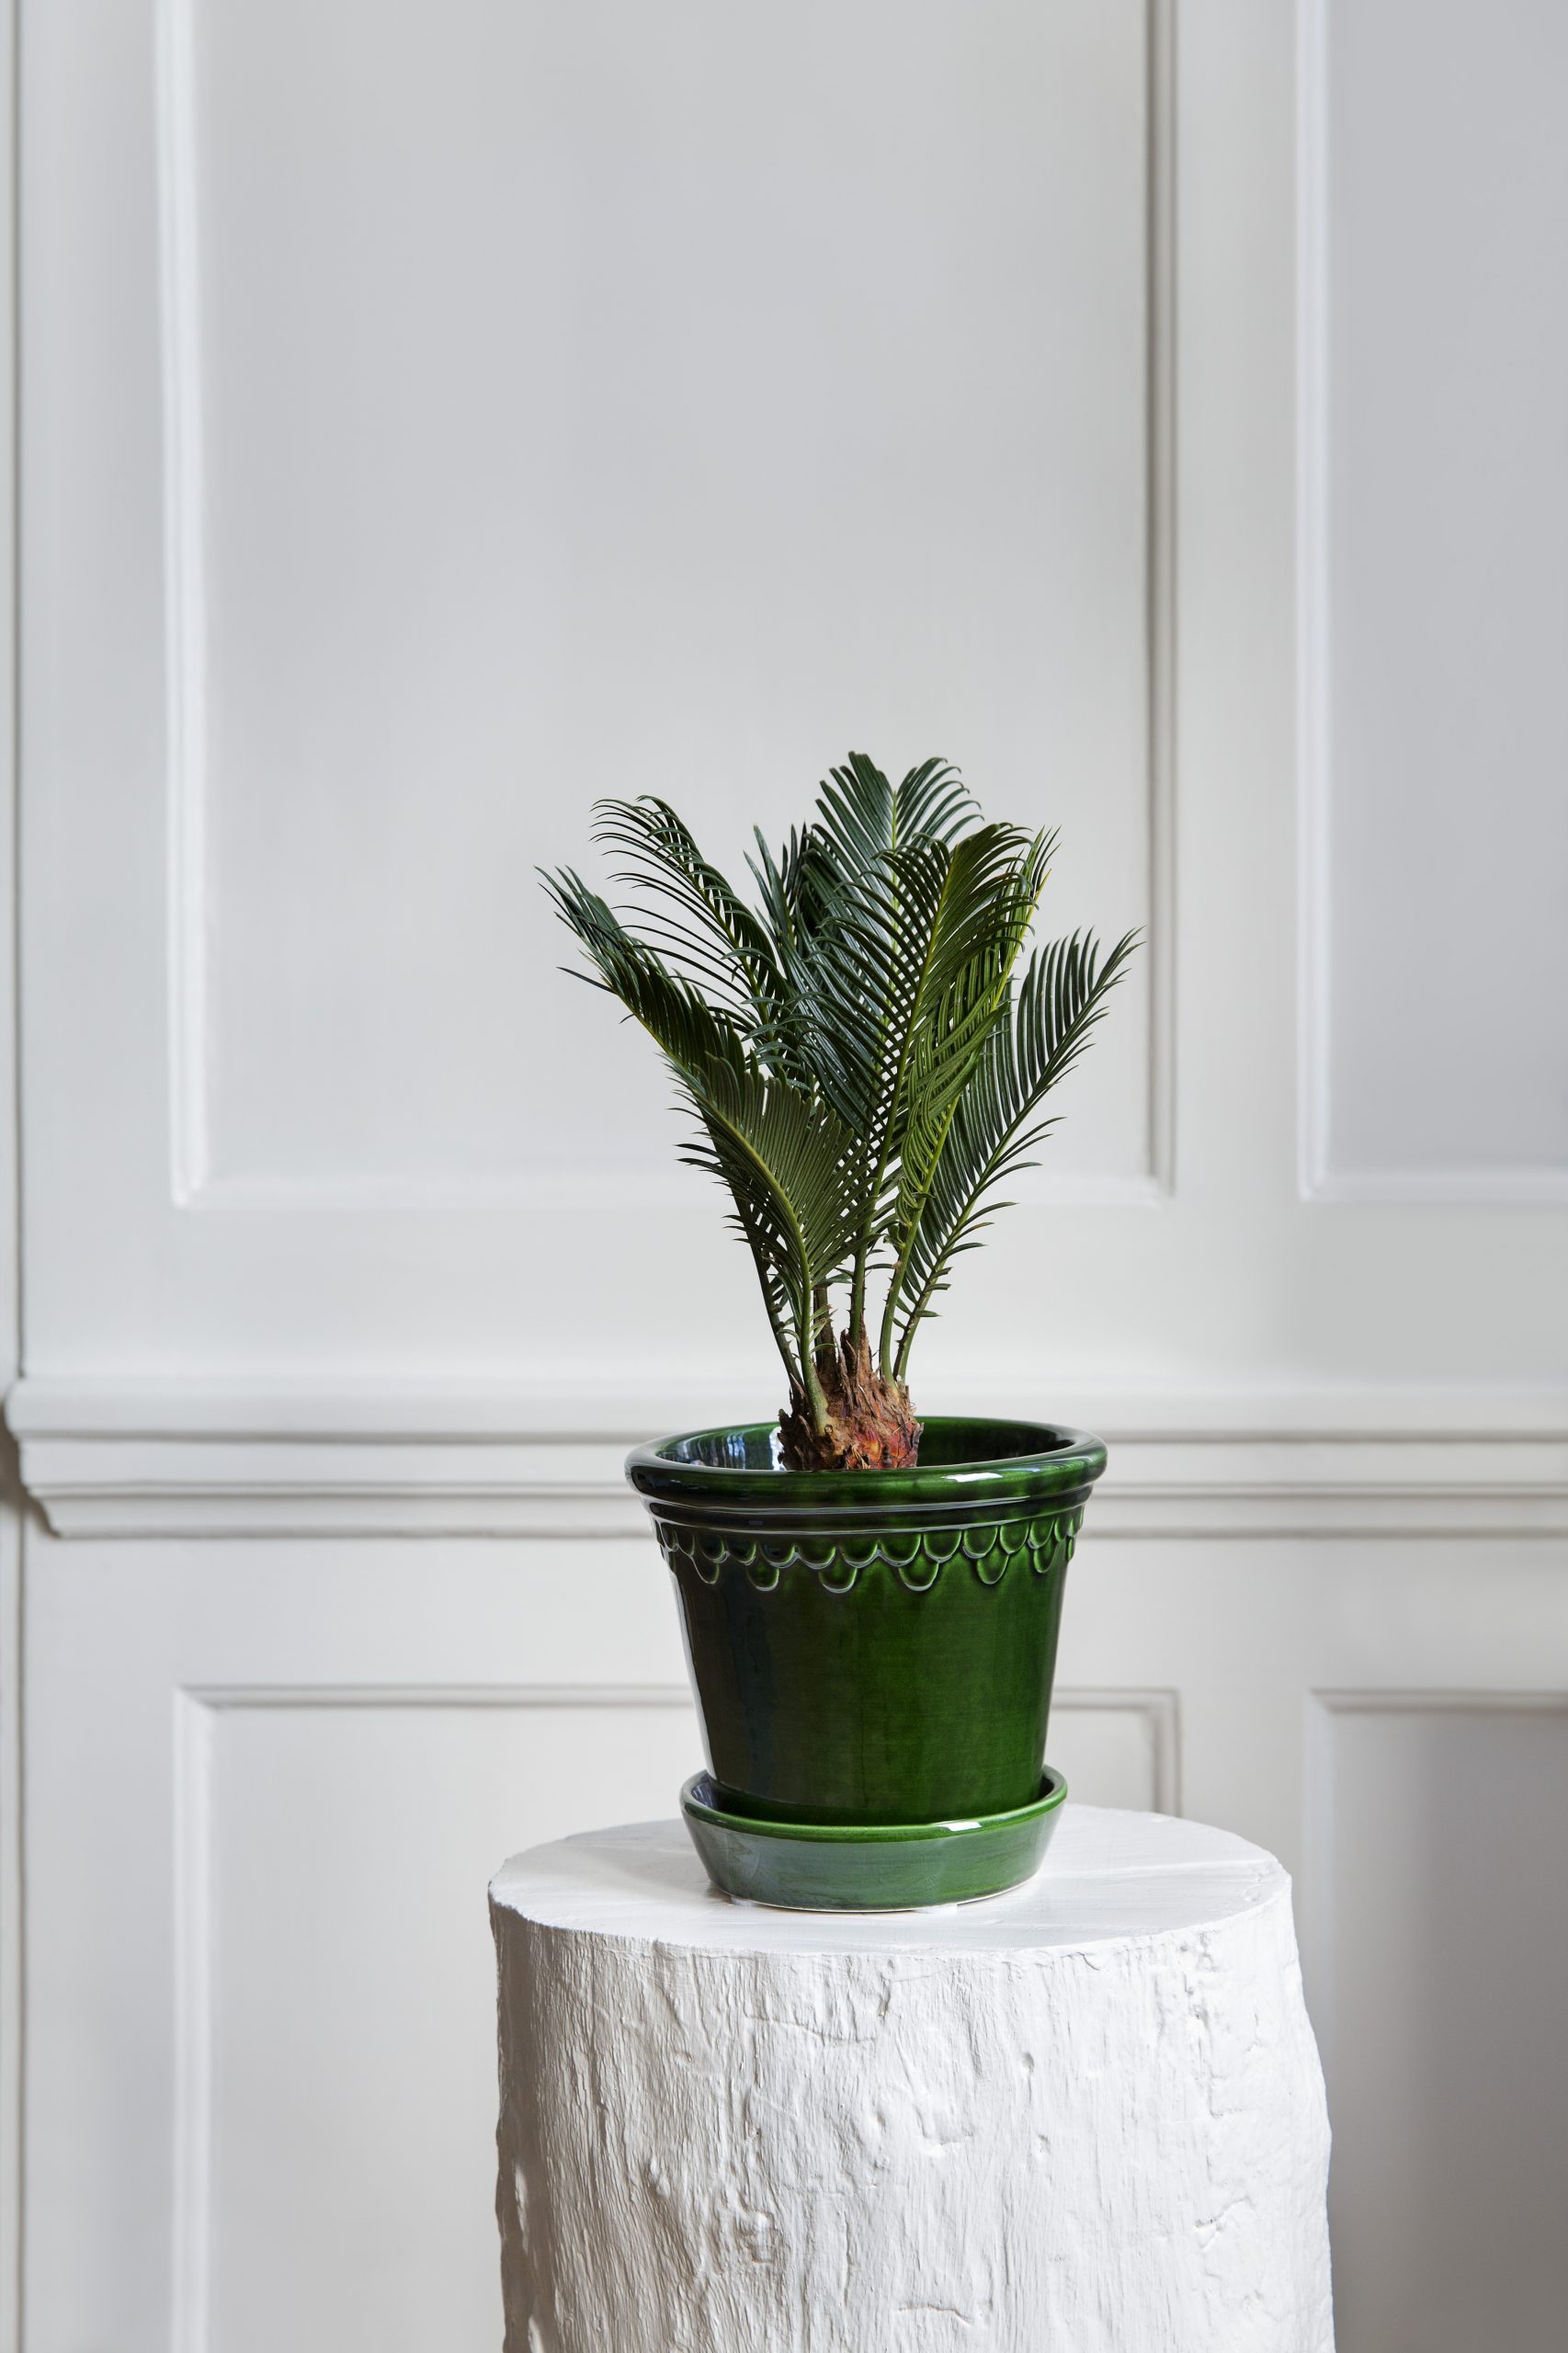 Glazed emerald green pot with small palm tree.